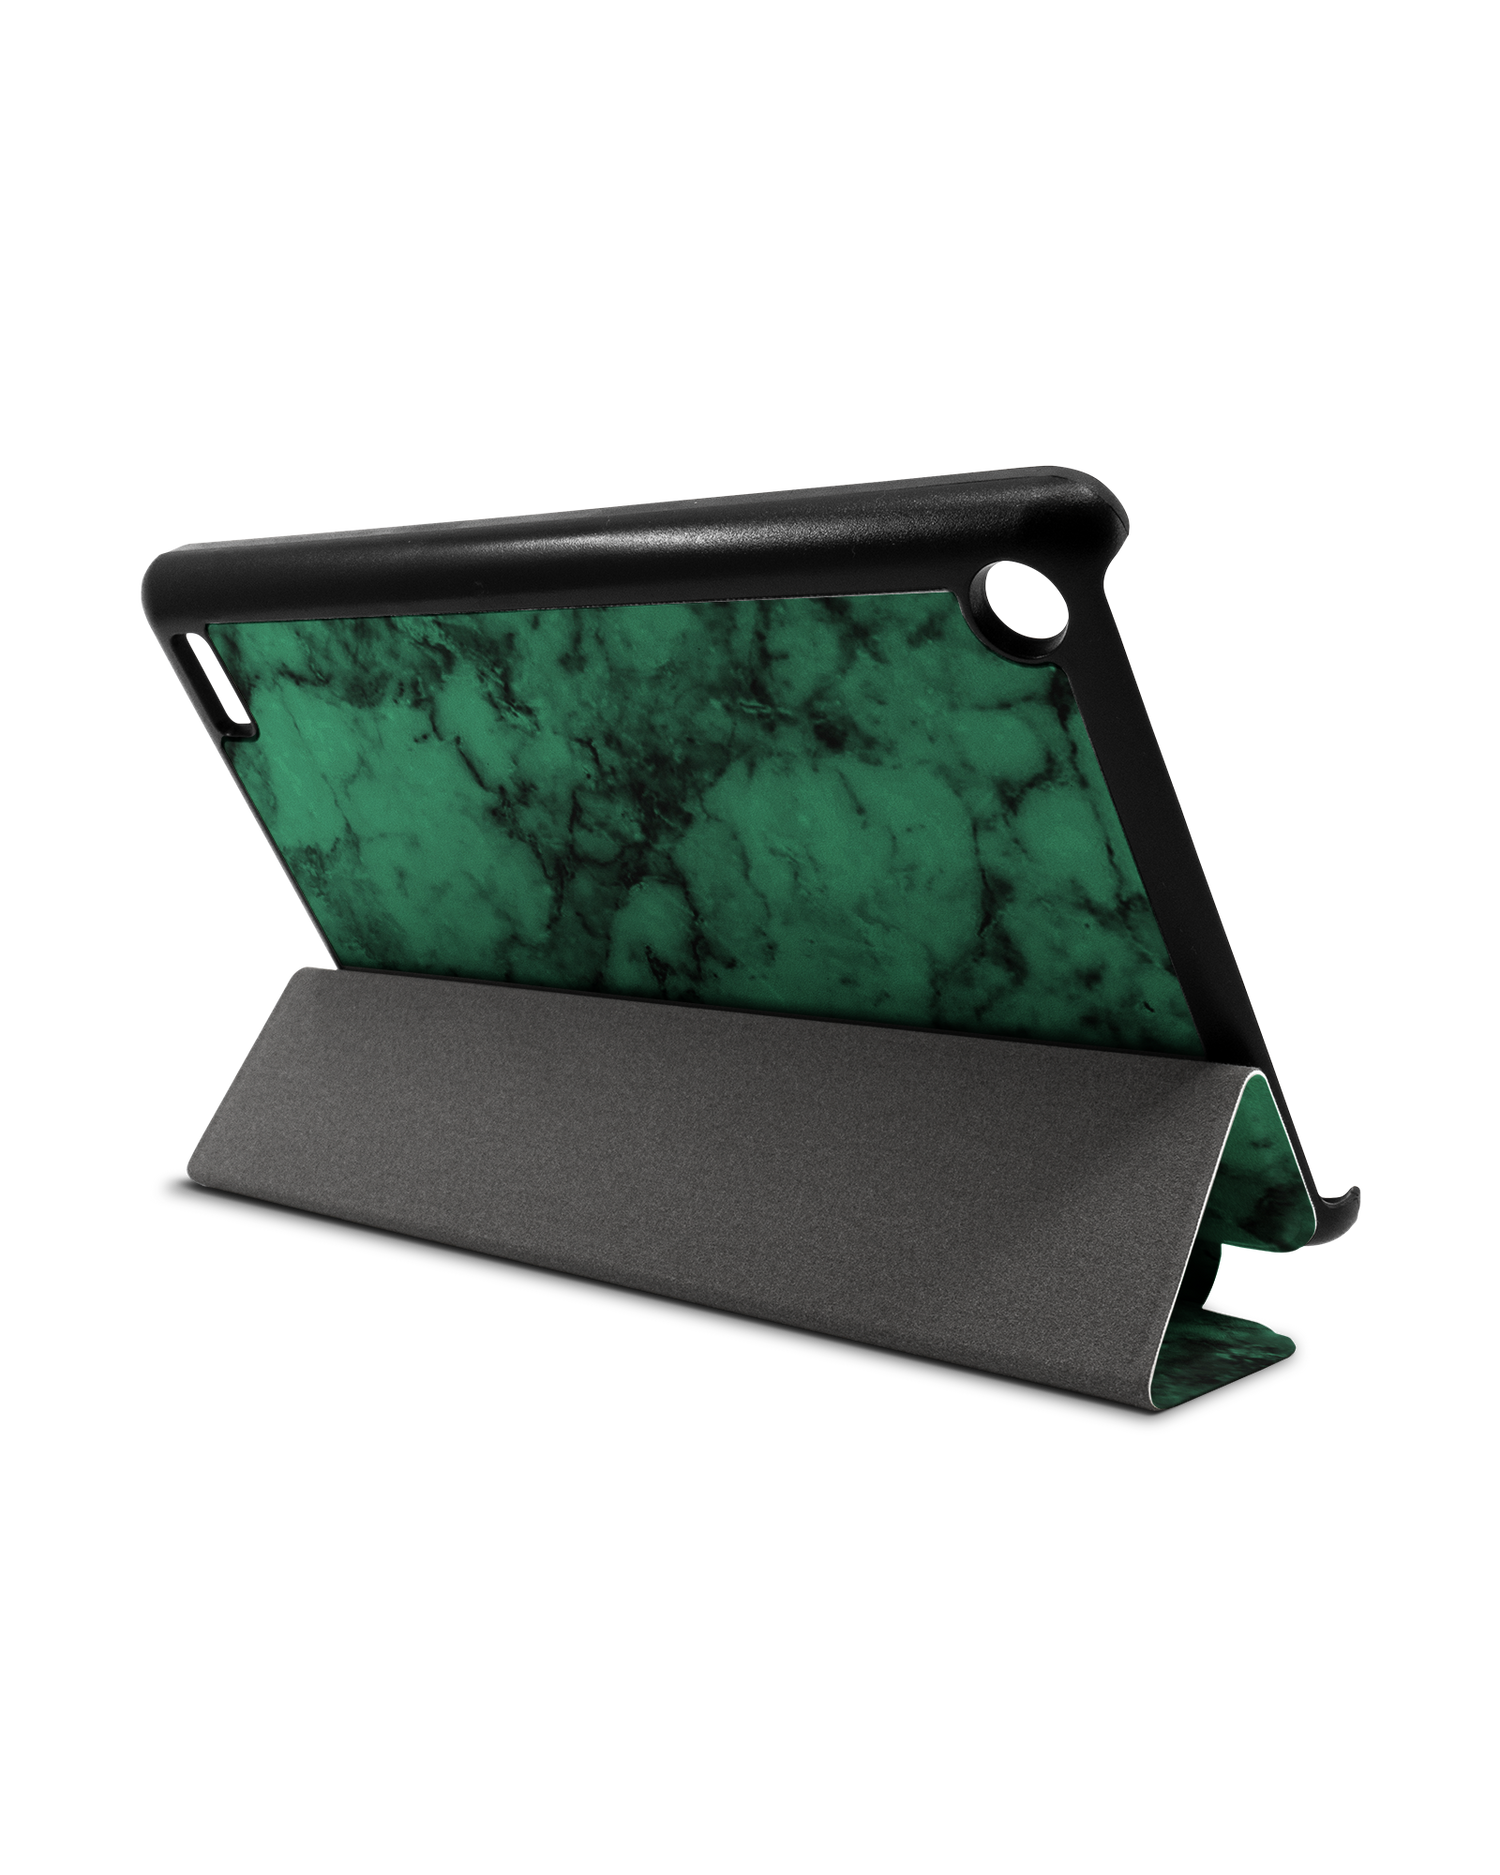 Green Marble Tablet Smart Case for Amazon Fire 7: Used as Stand